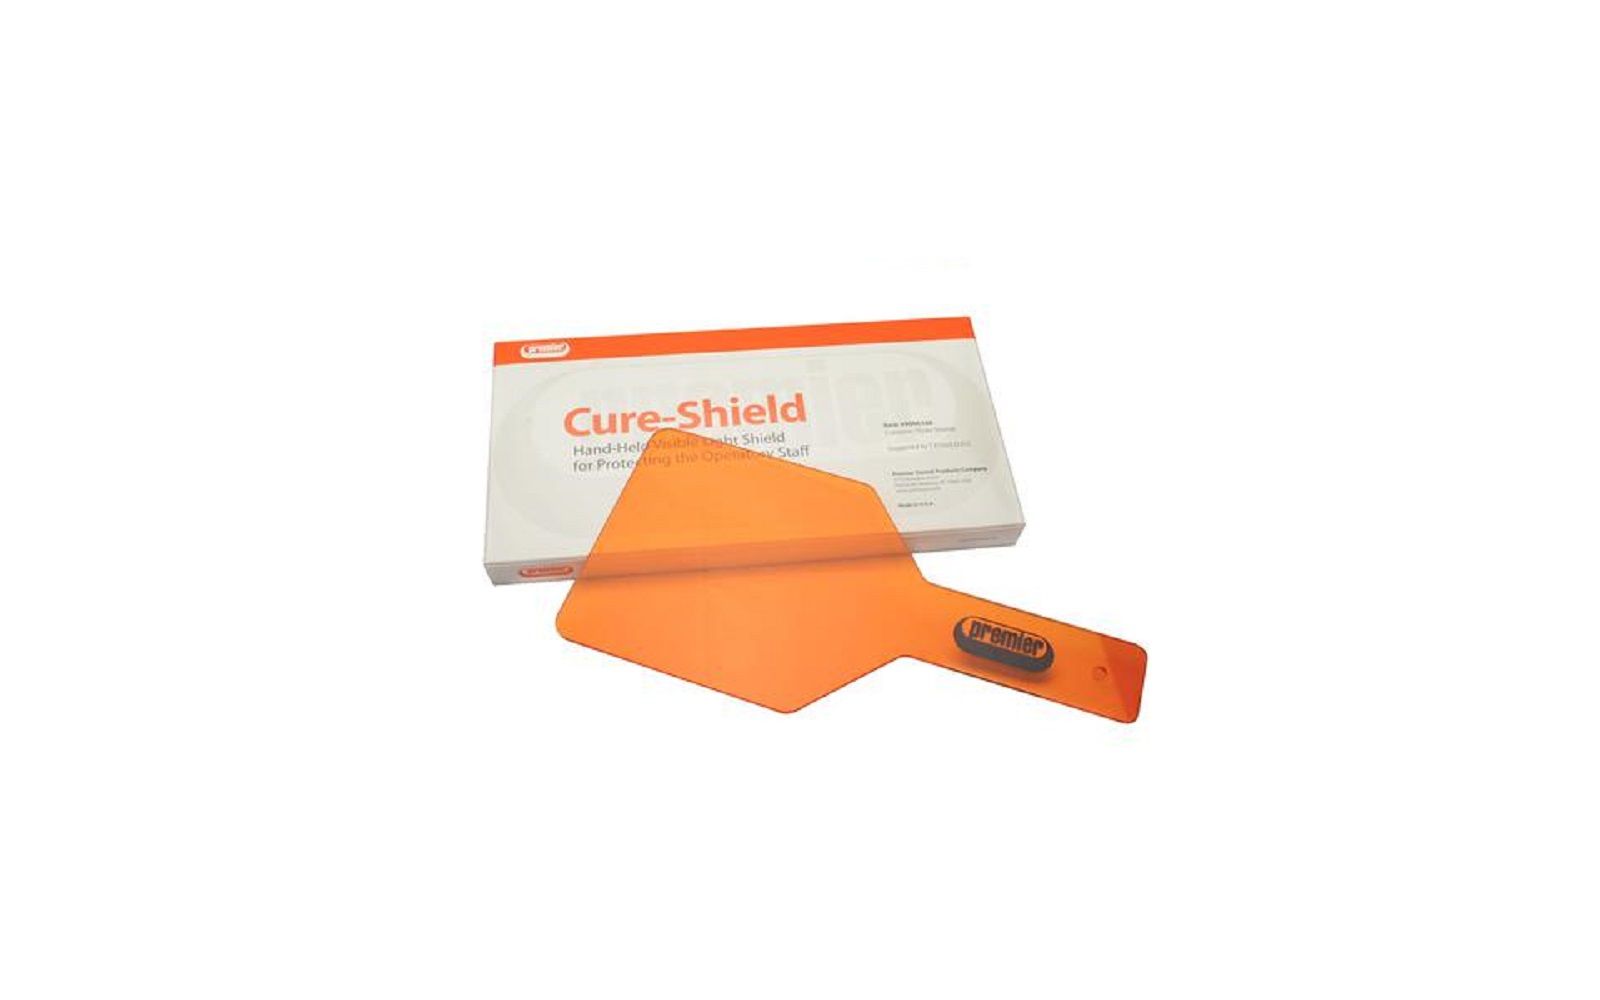 Cure-shield hand-held visible light shield